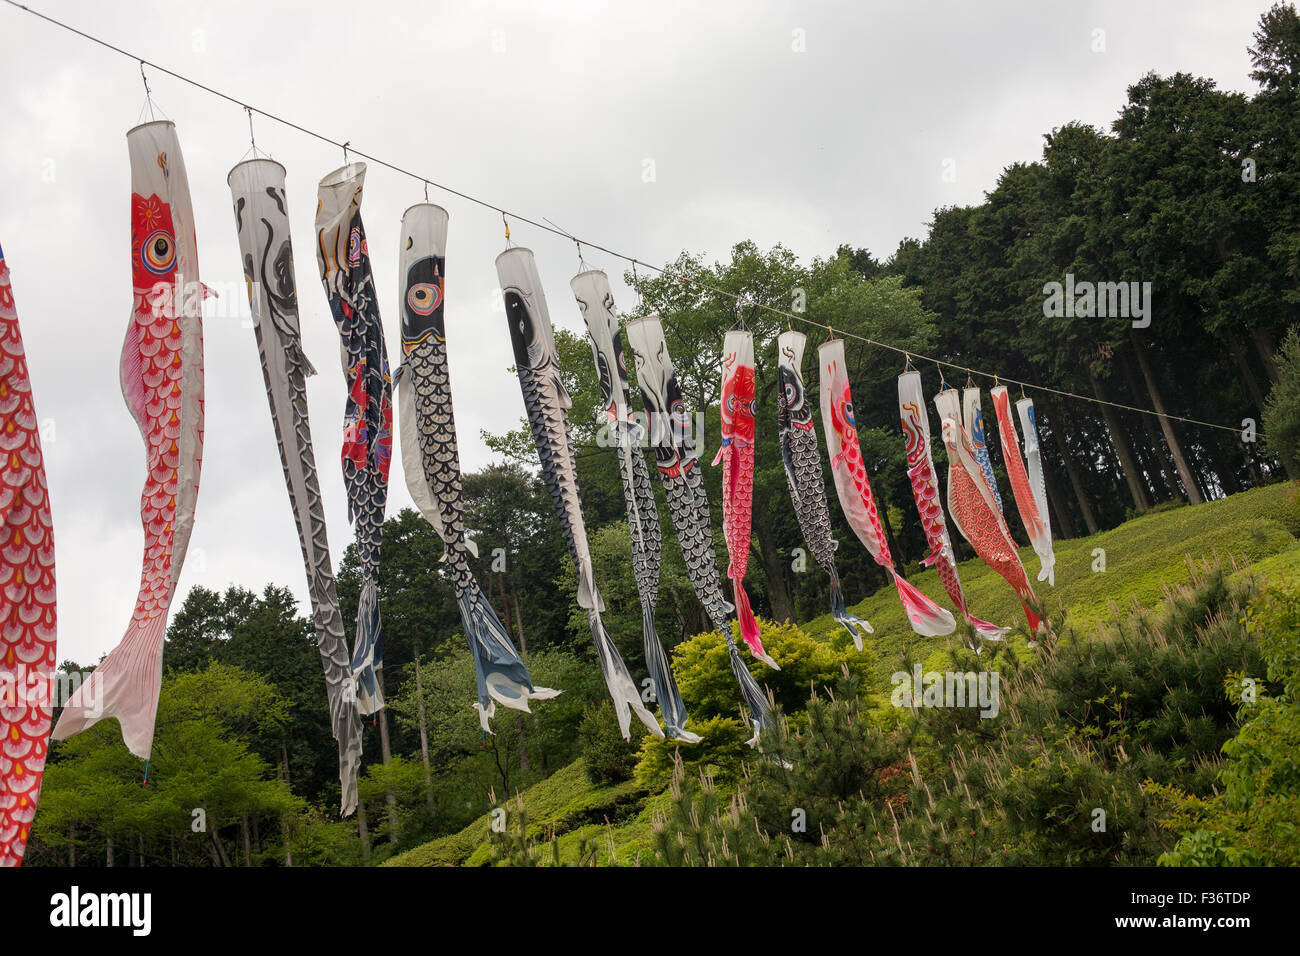 Colorful variety of koinobori fish kites hanging on a wire with green forest in background straight down Stock Photo